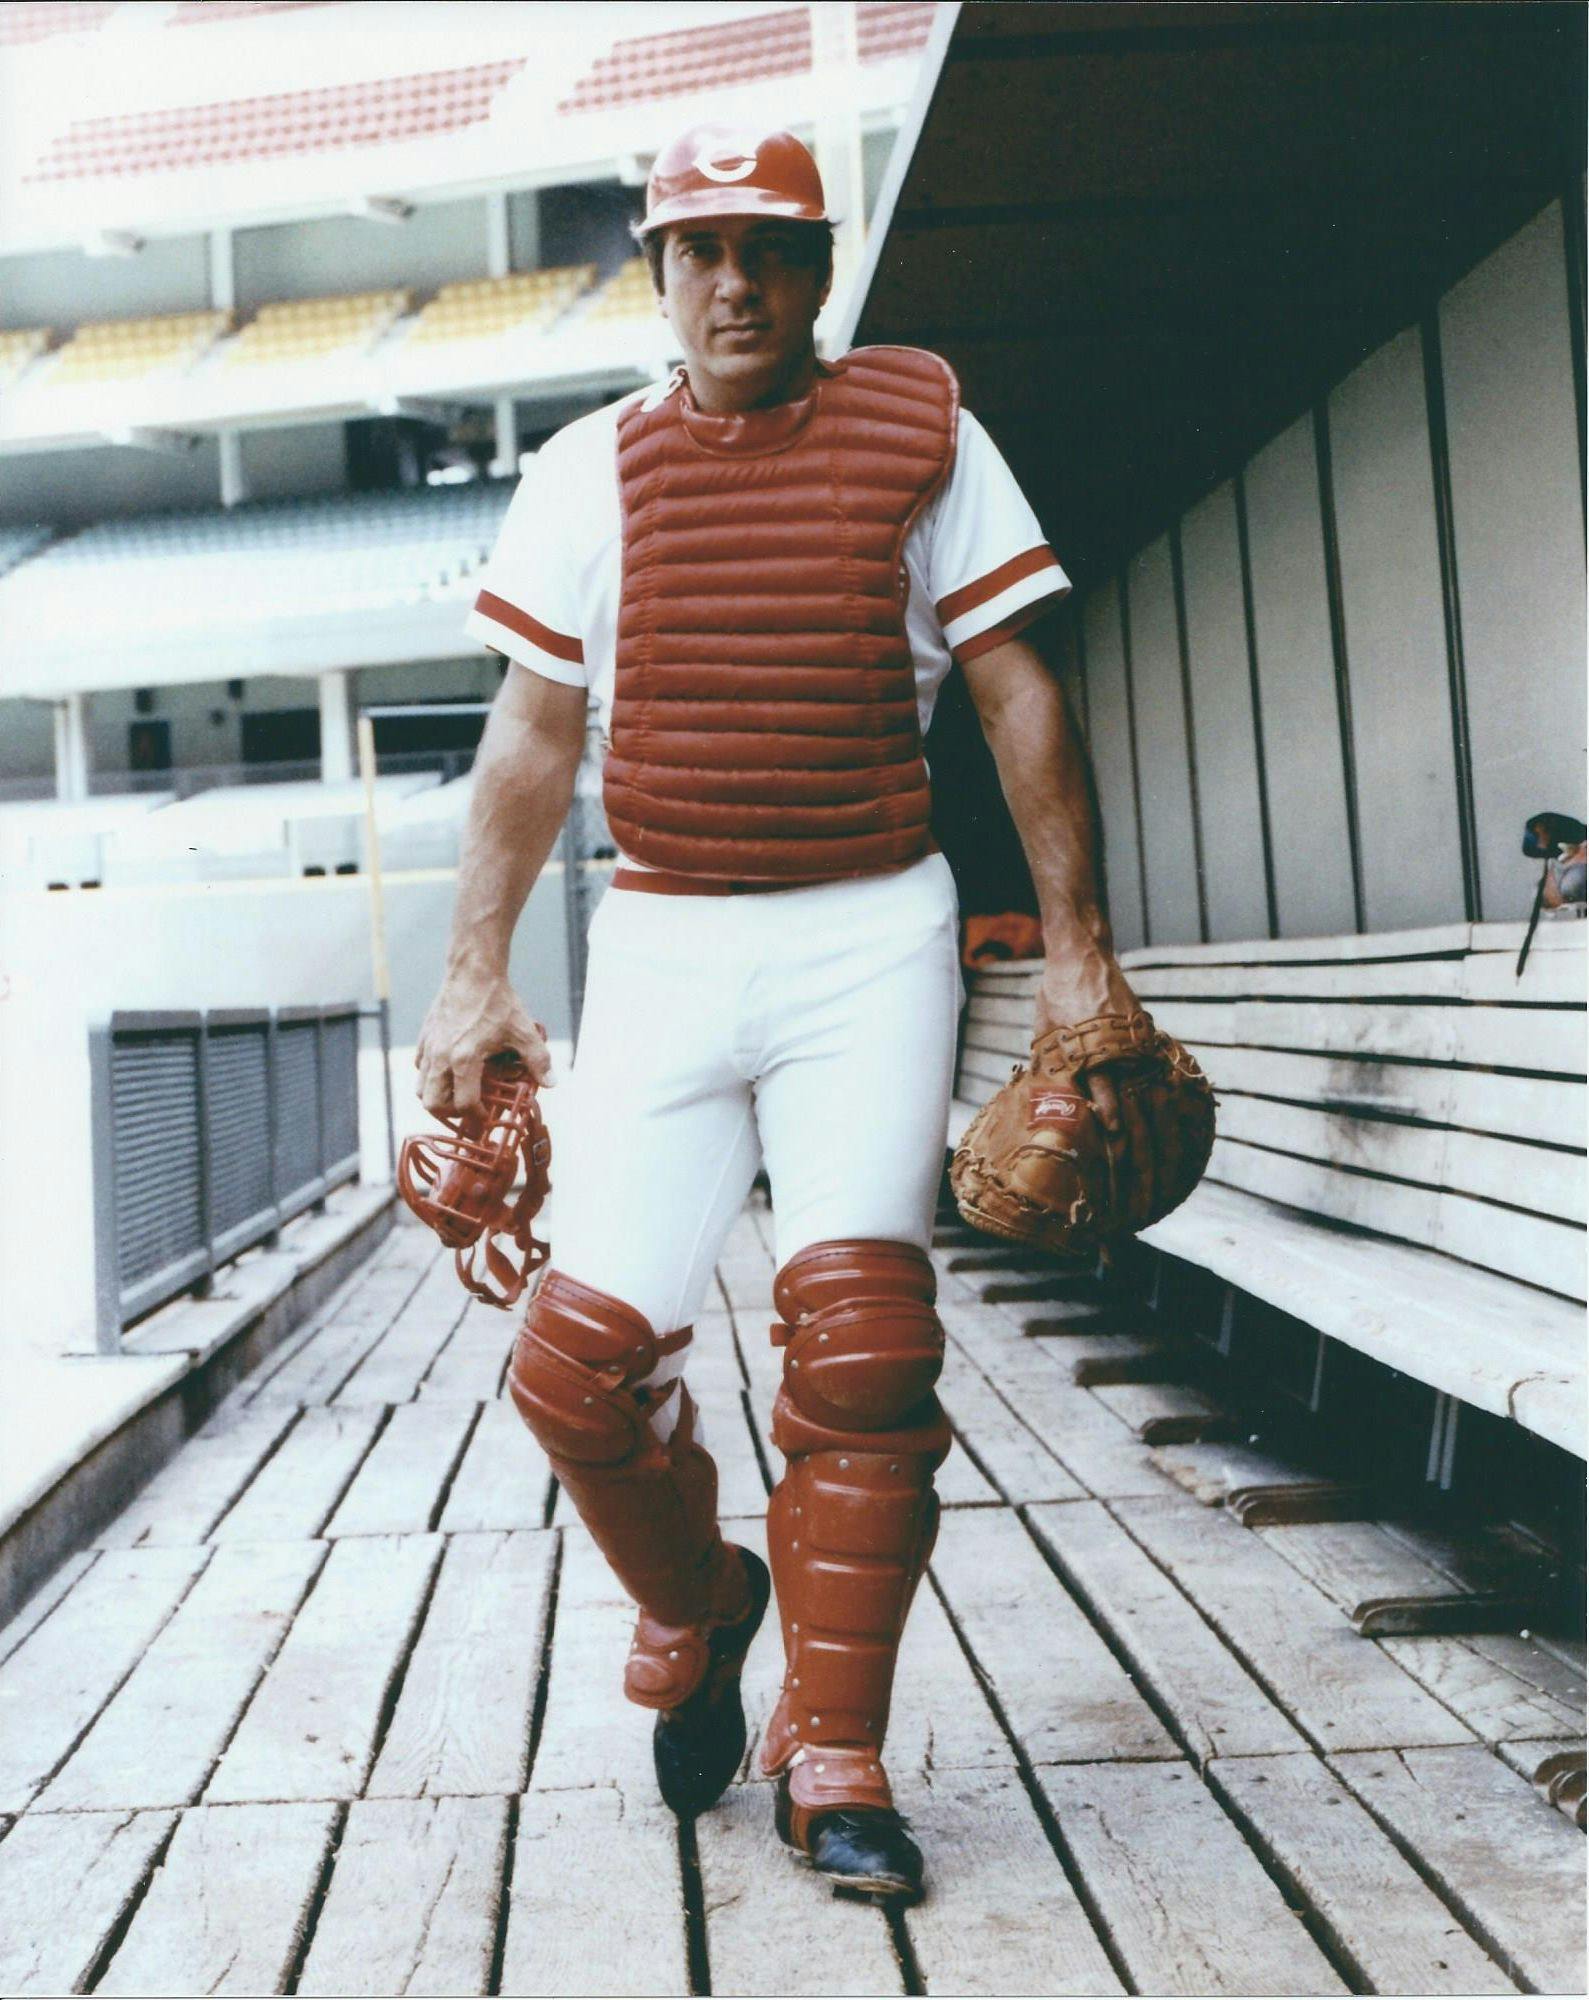 Johnny Bench, who played for the Cincinnati Reds from 1967 to 1983, was diagnosed with basal cell carcinoma, a non-melanoma skin cancer, in 2012. 